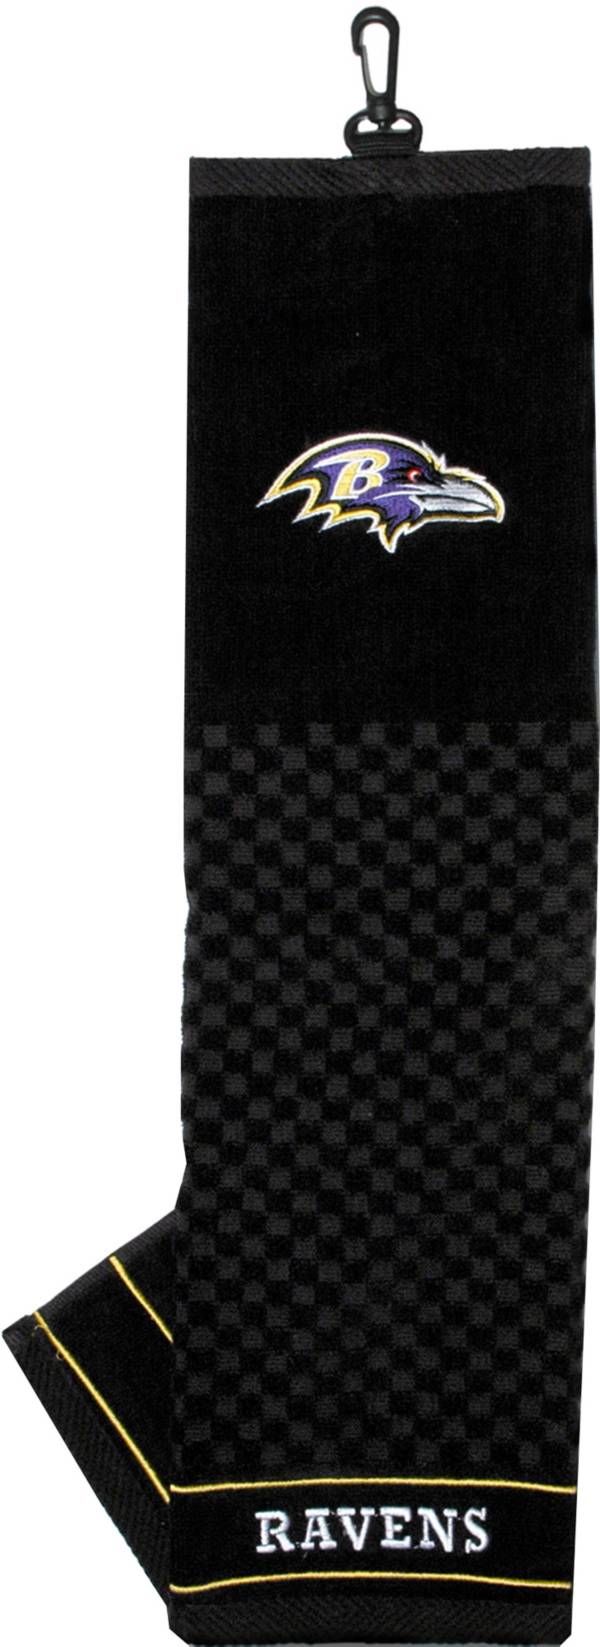 Team Golf Baltimore Ravens Embroidered Towel product image